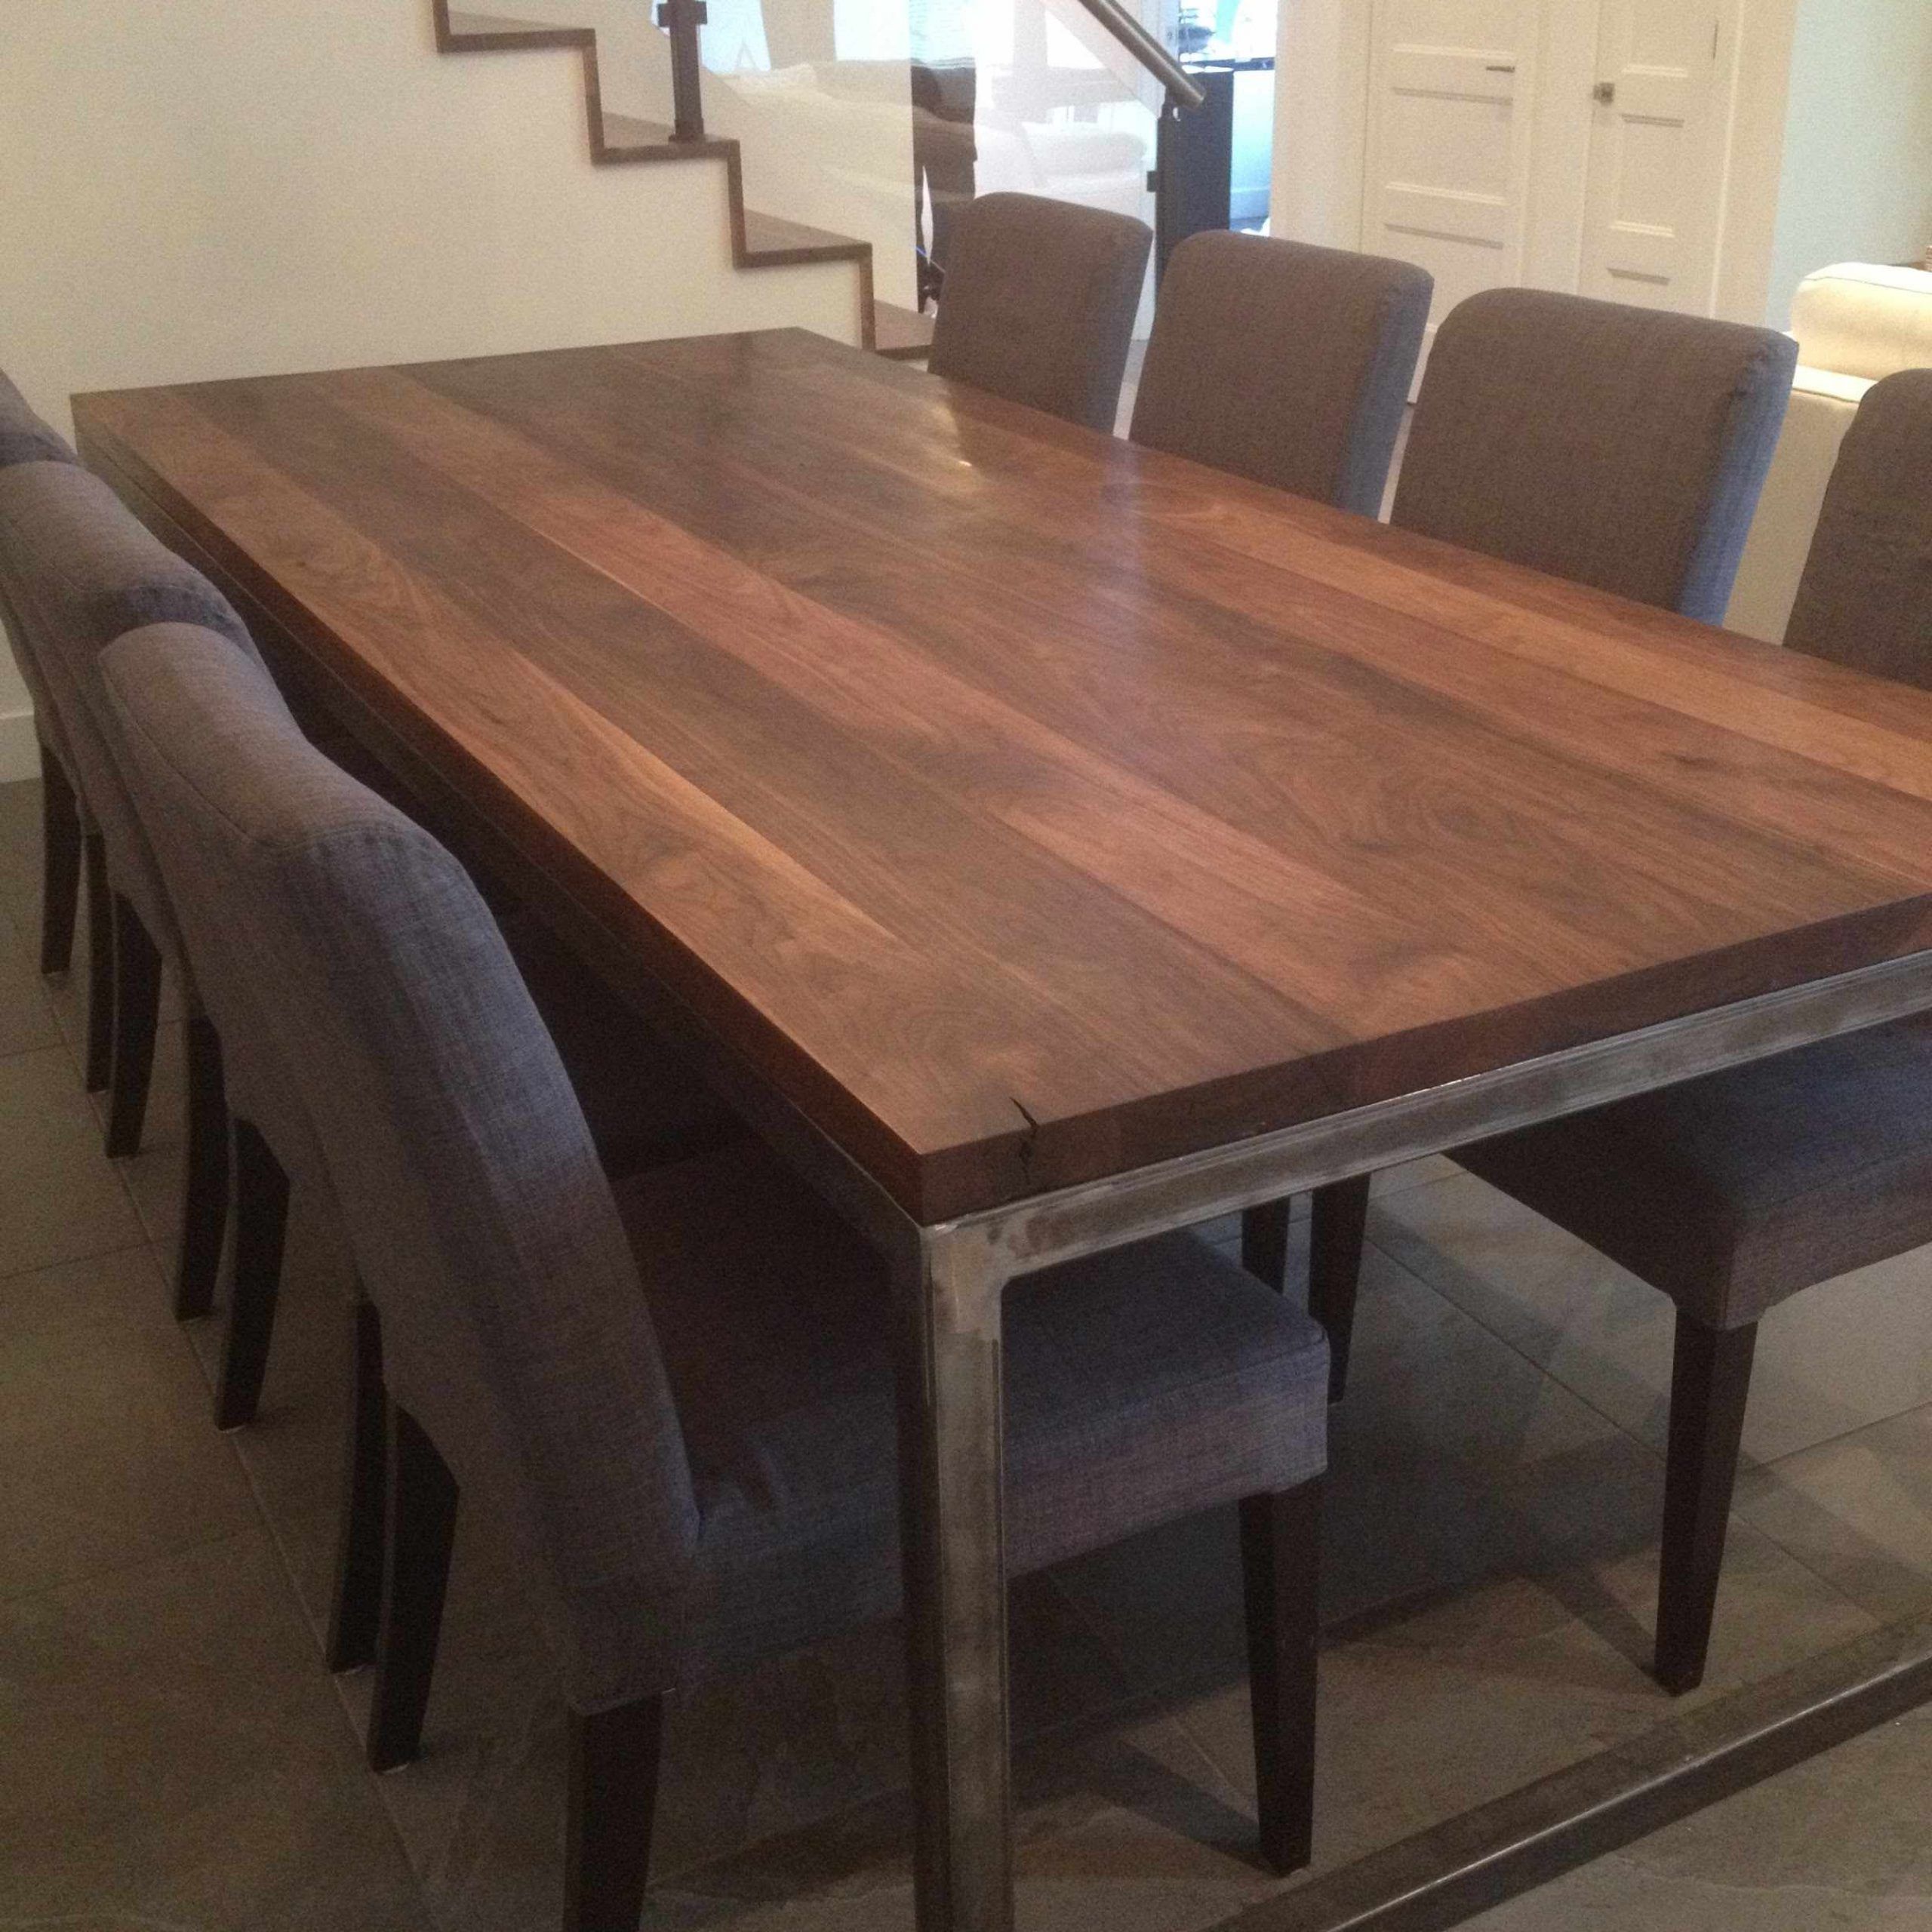 Live Edge Black Walnut Dining Table — Bois & Design – Custom Made With Dark Walnut Desks And Chair Set (View 8 of 15)